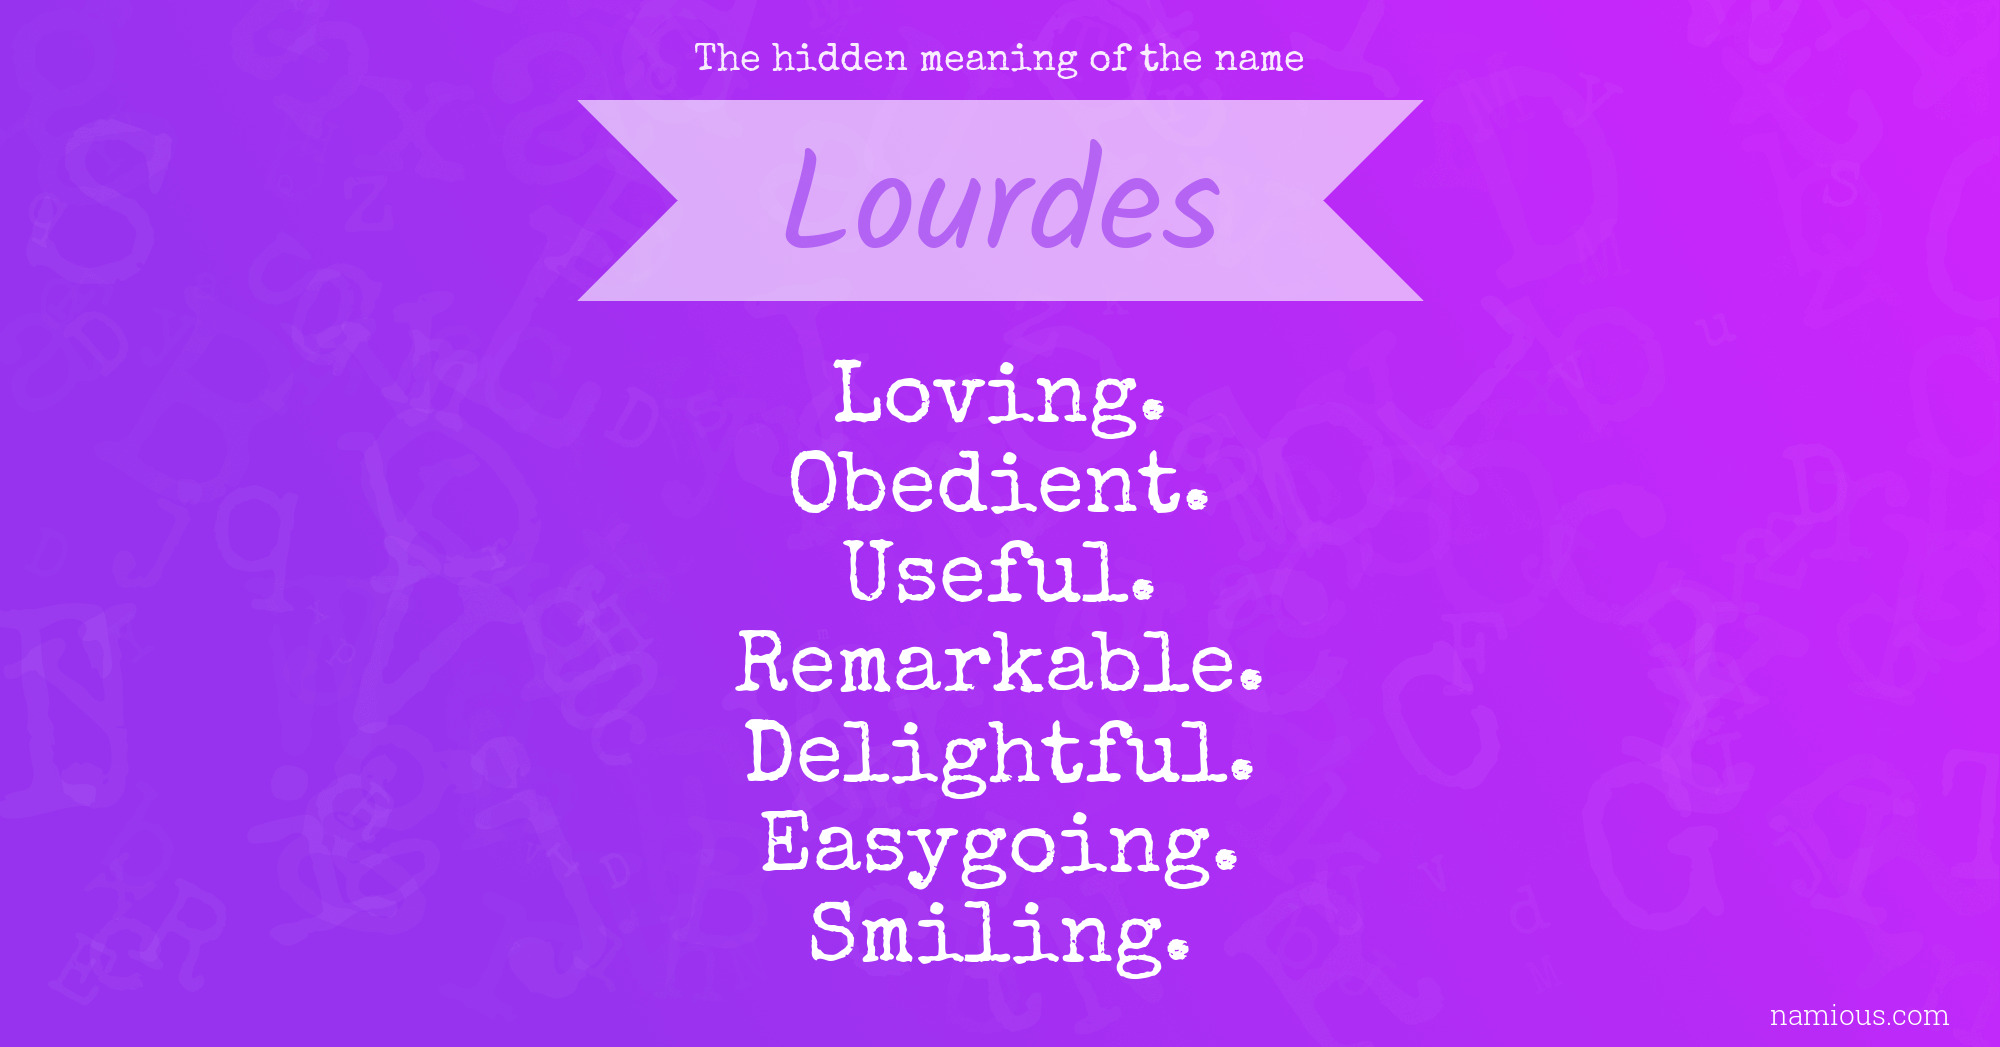 The hidden meaning of the name Lourdes